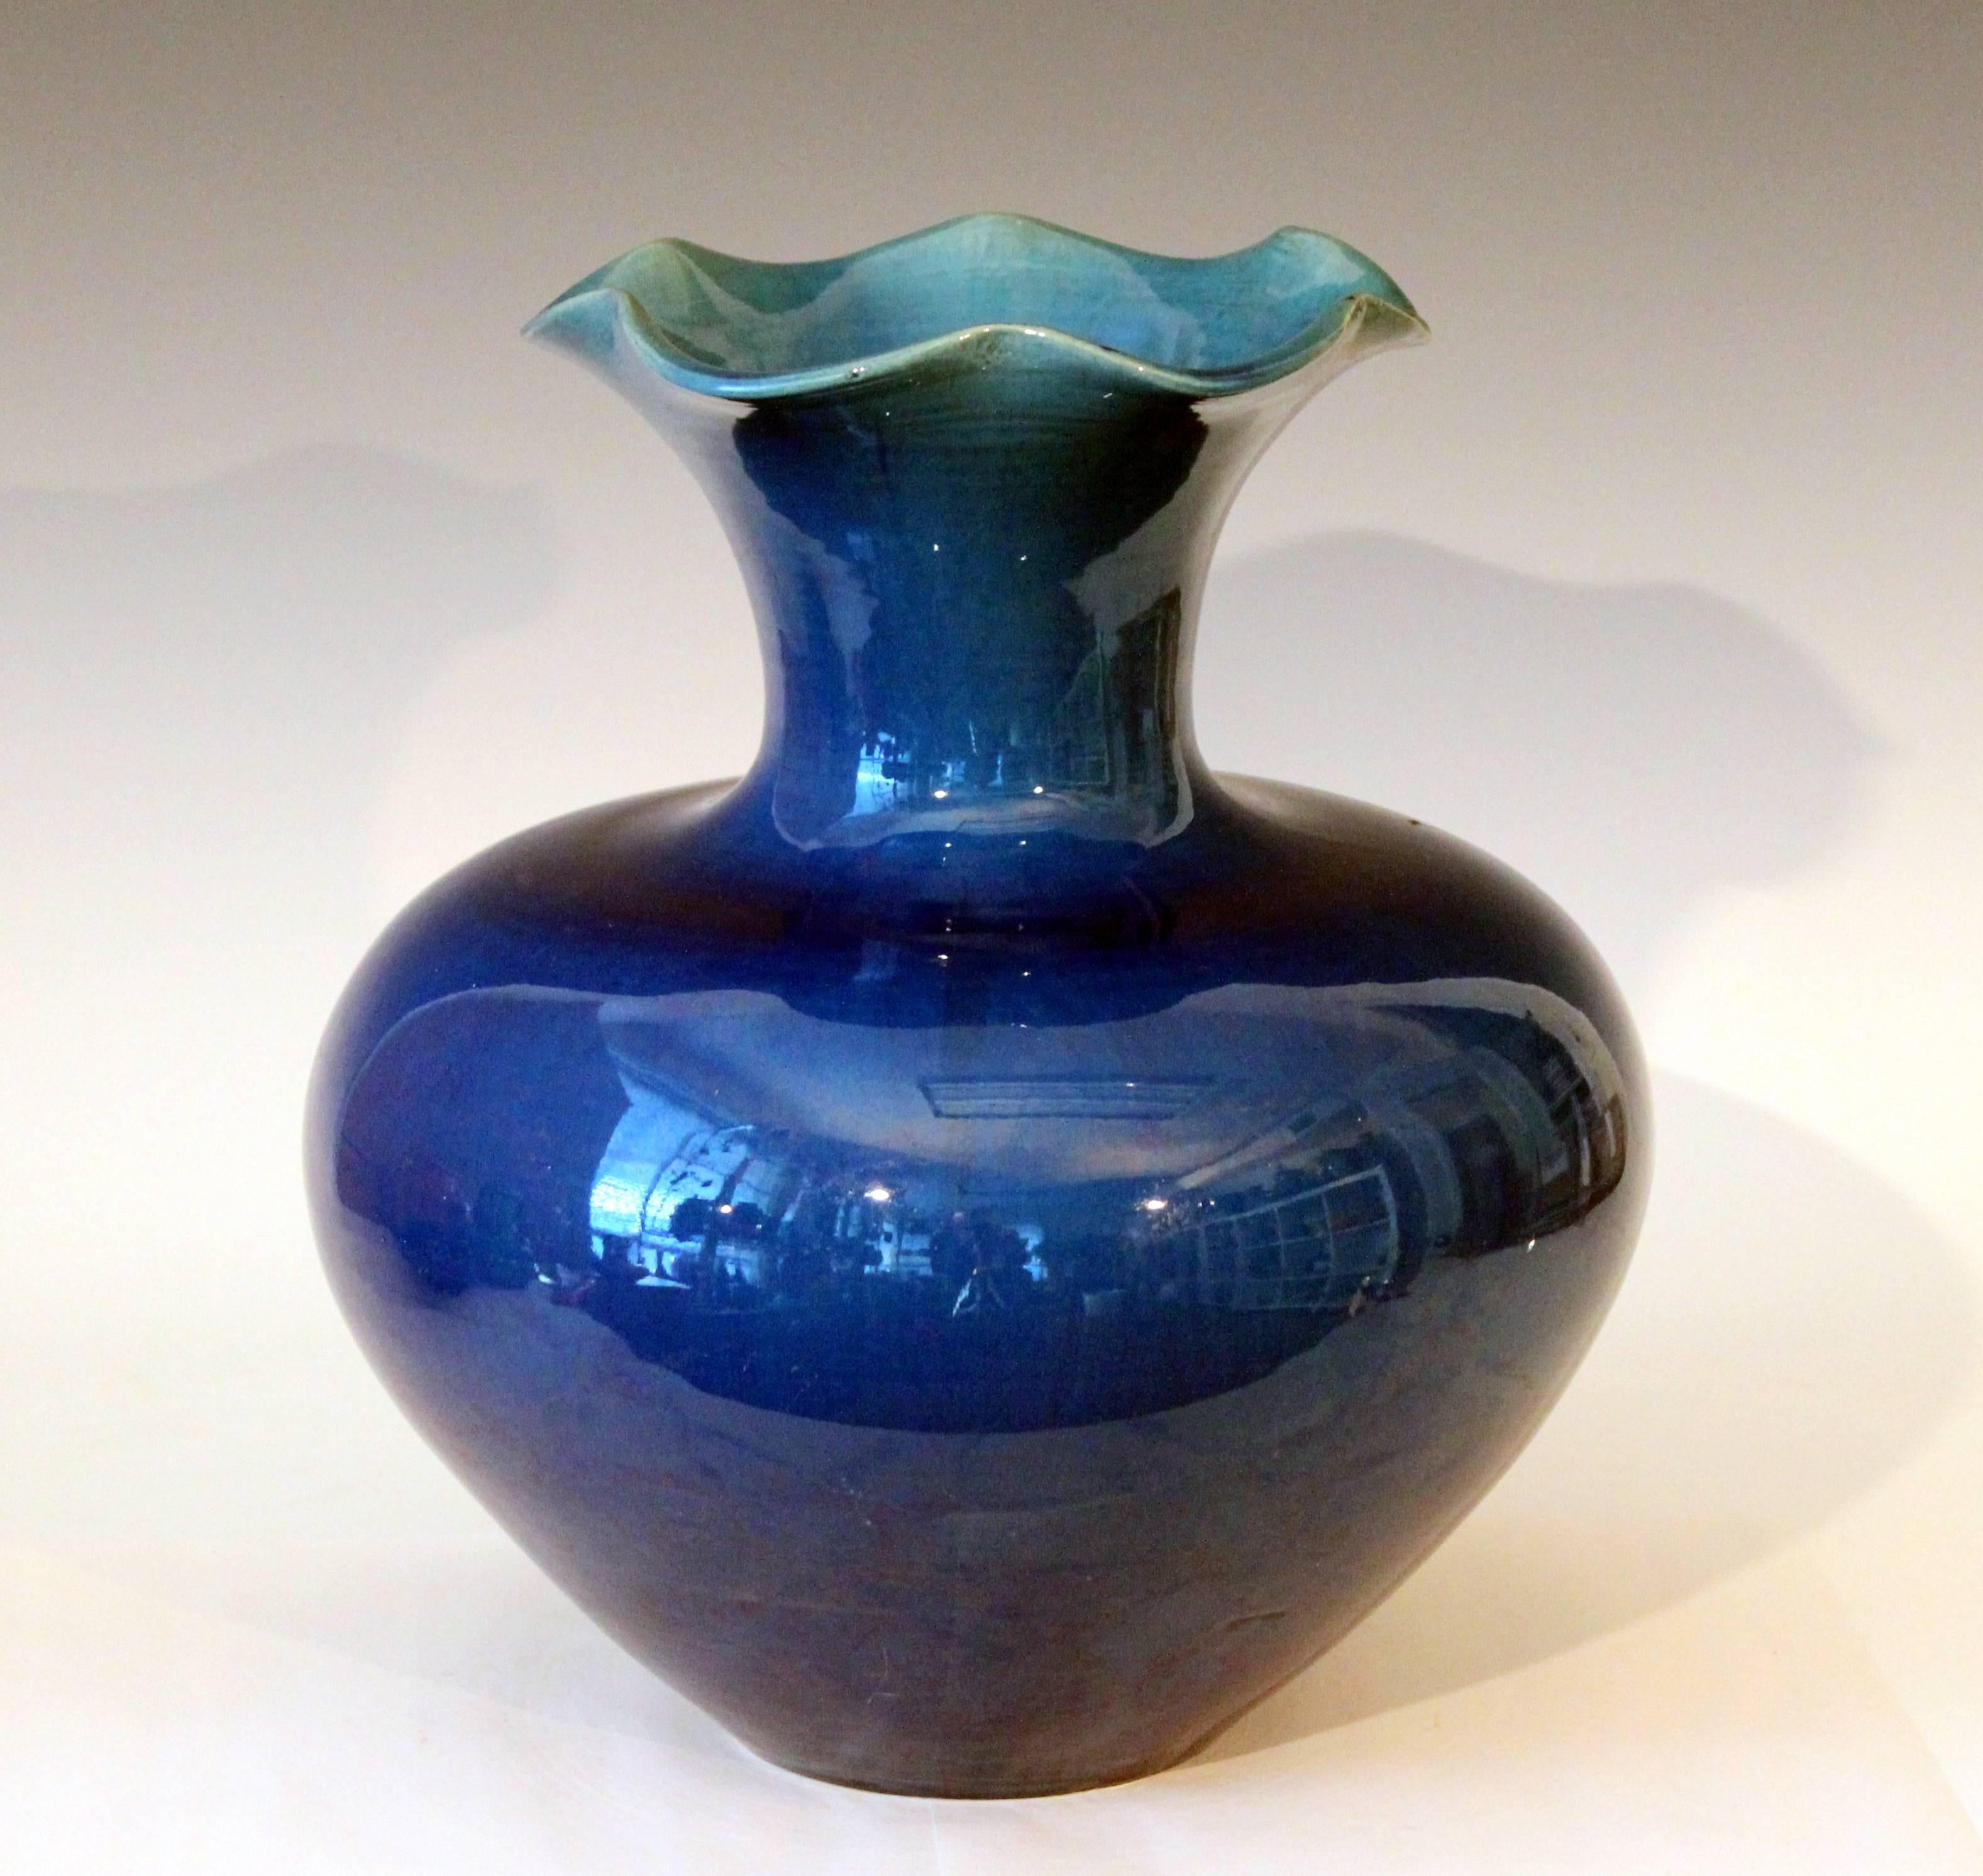 Large Awaji pottery vase in organic Art Nouveau form with flaring, ruffled mouthrim and blue monochrome glaze, circa 1910s. Measures: 12